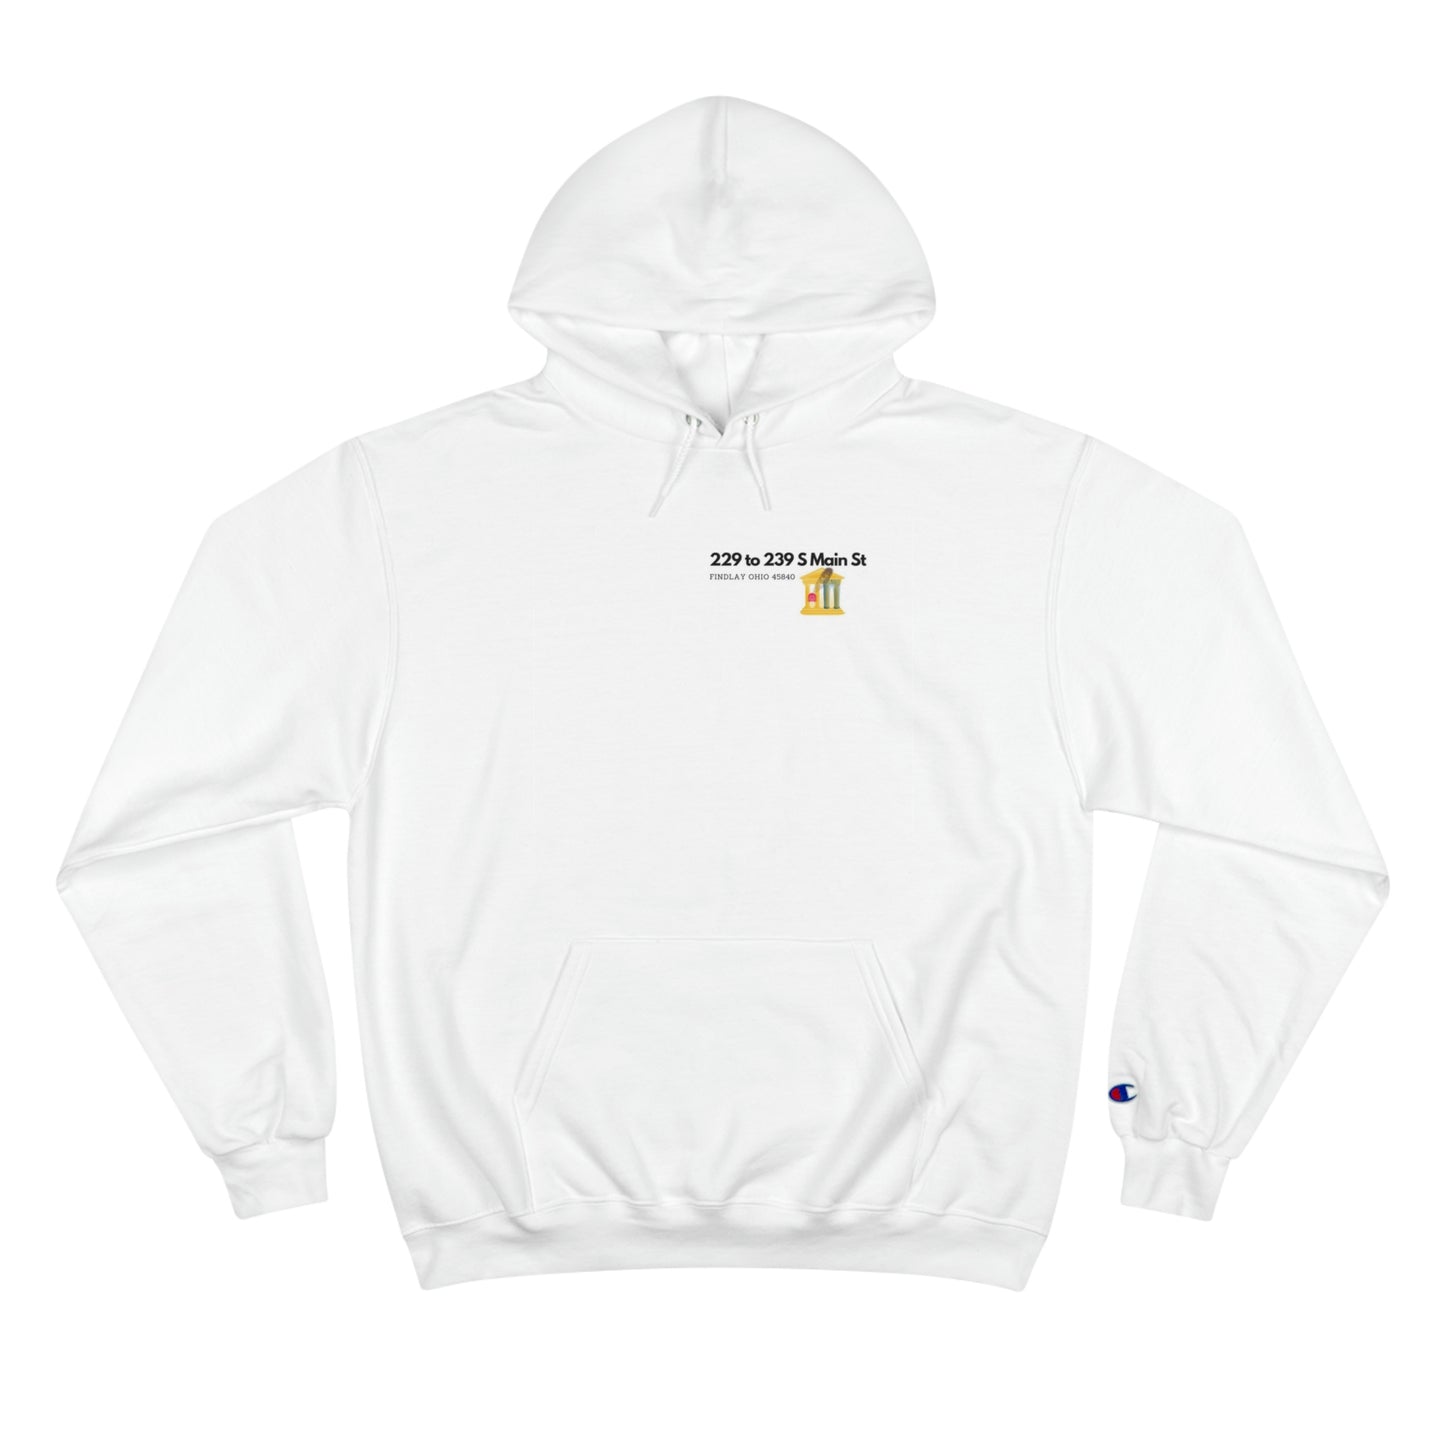 229 to 239 South Main St 45840 Champion Hoodie